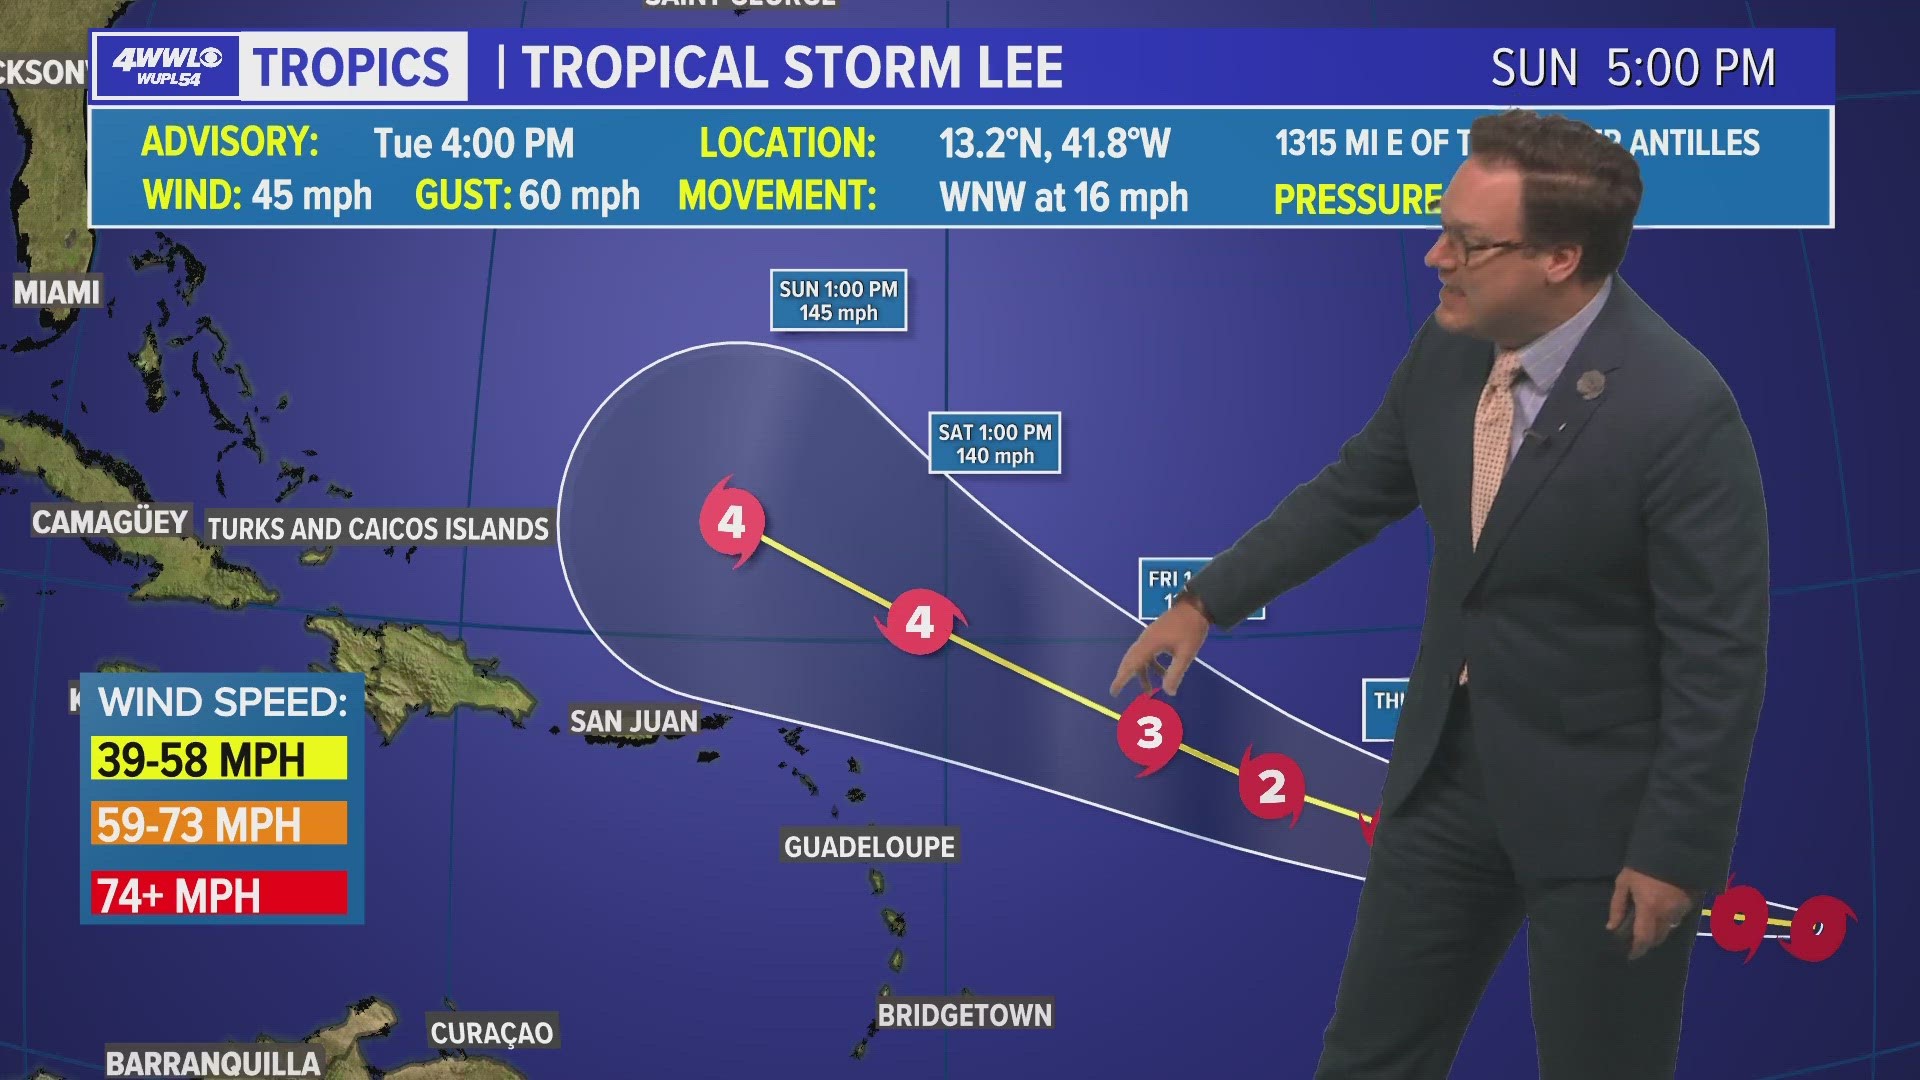 Tropical Update: Tropical Storm Lee forms in the Atlantic